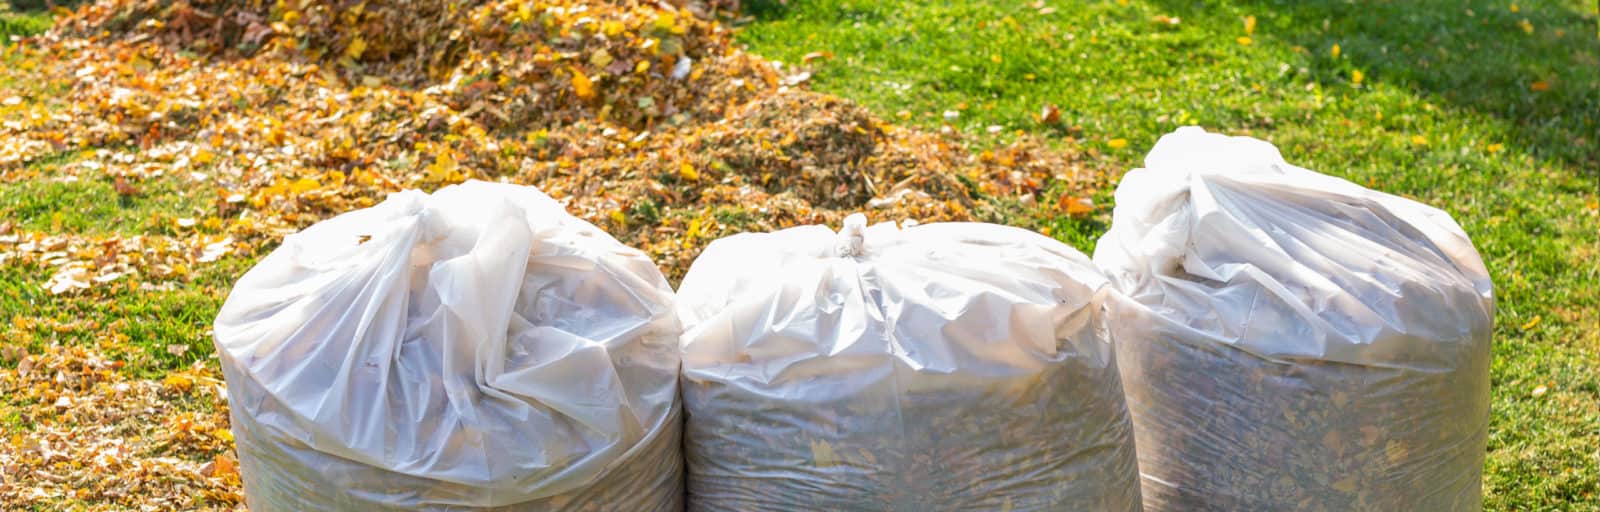 Bags of yard waste in need of yard waste removal services